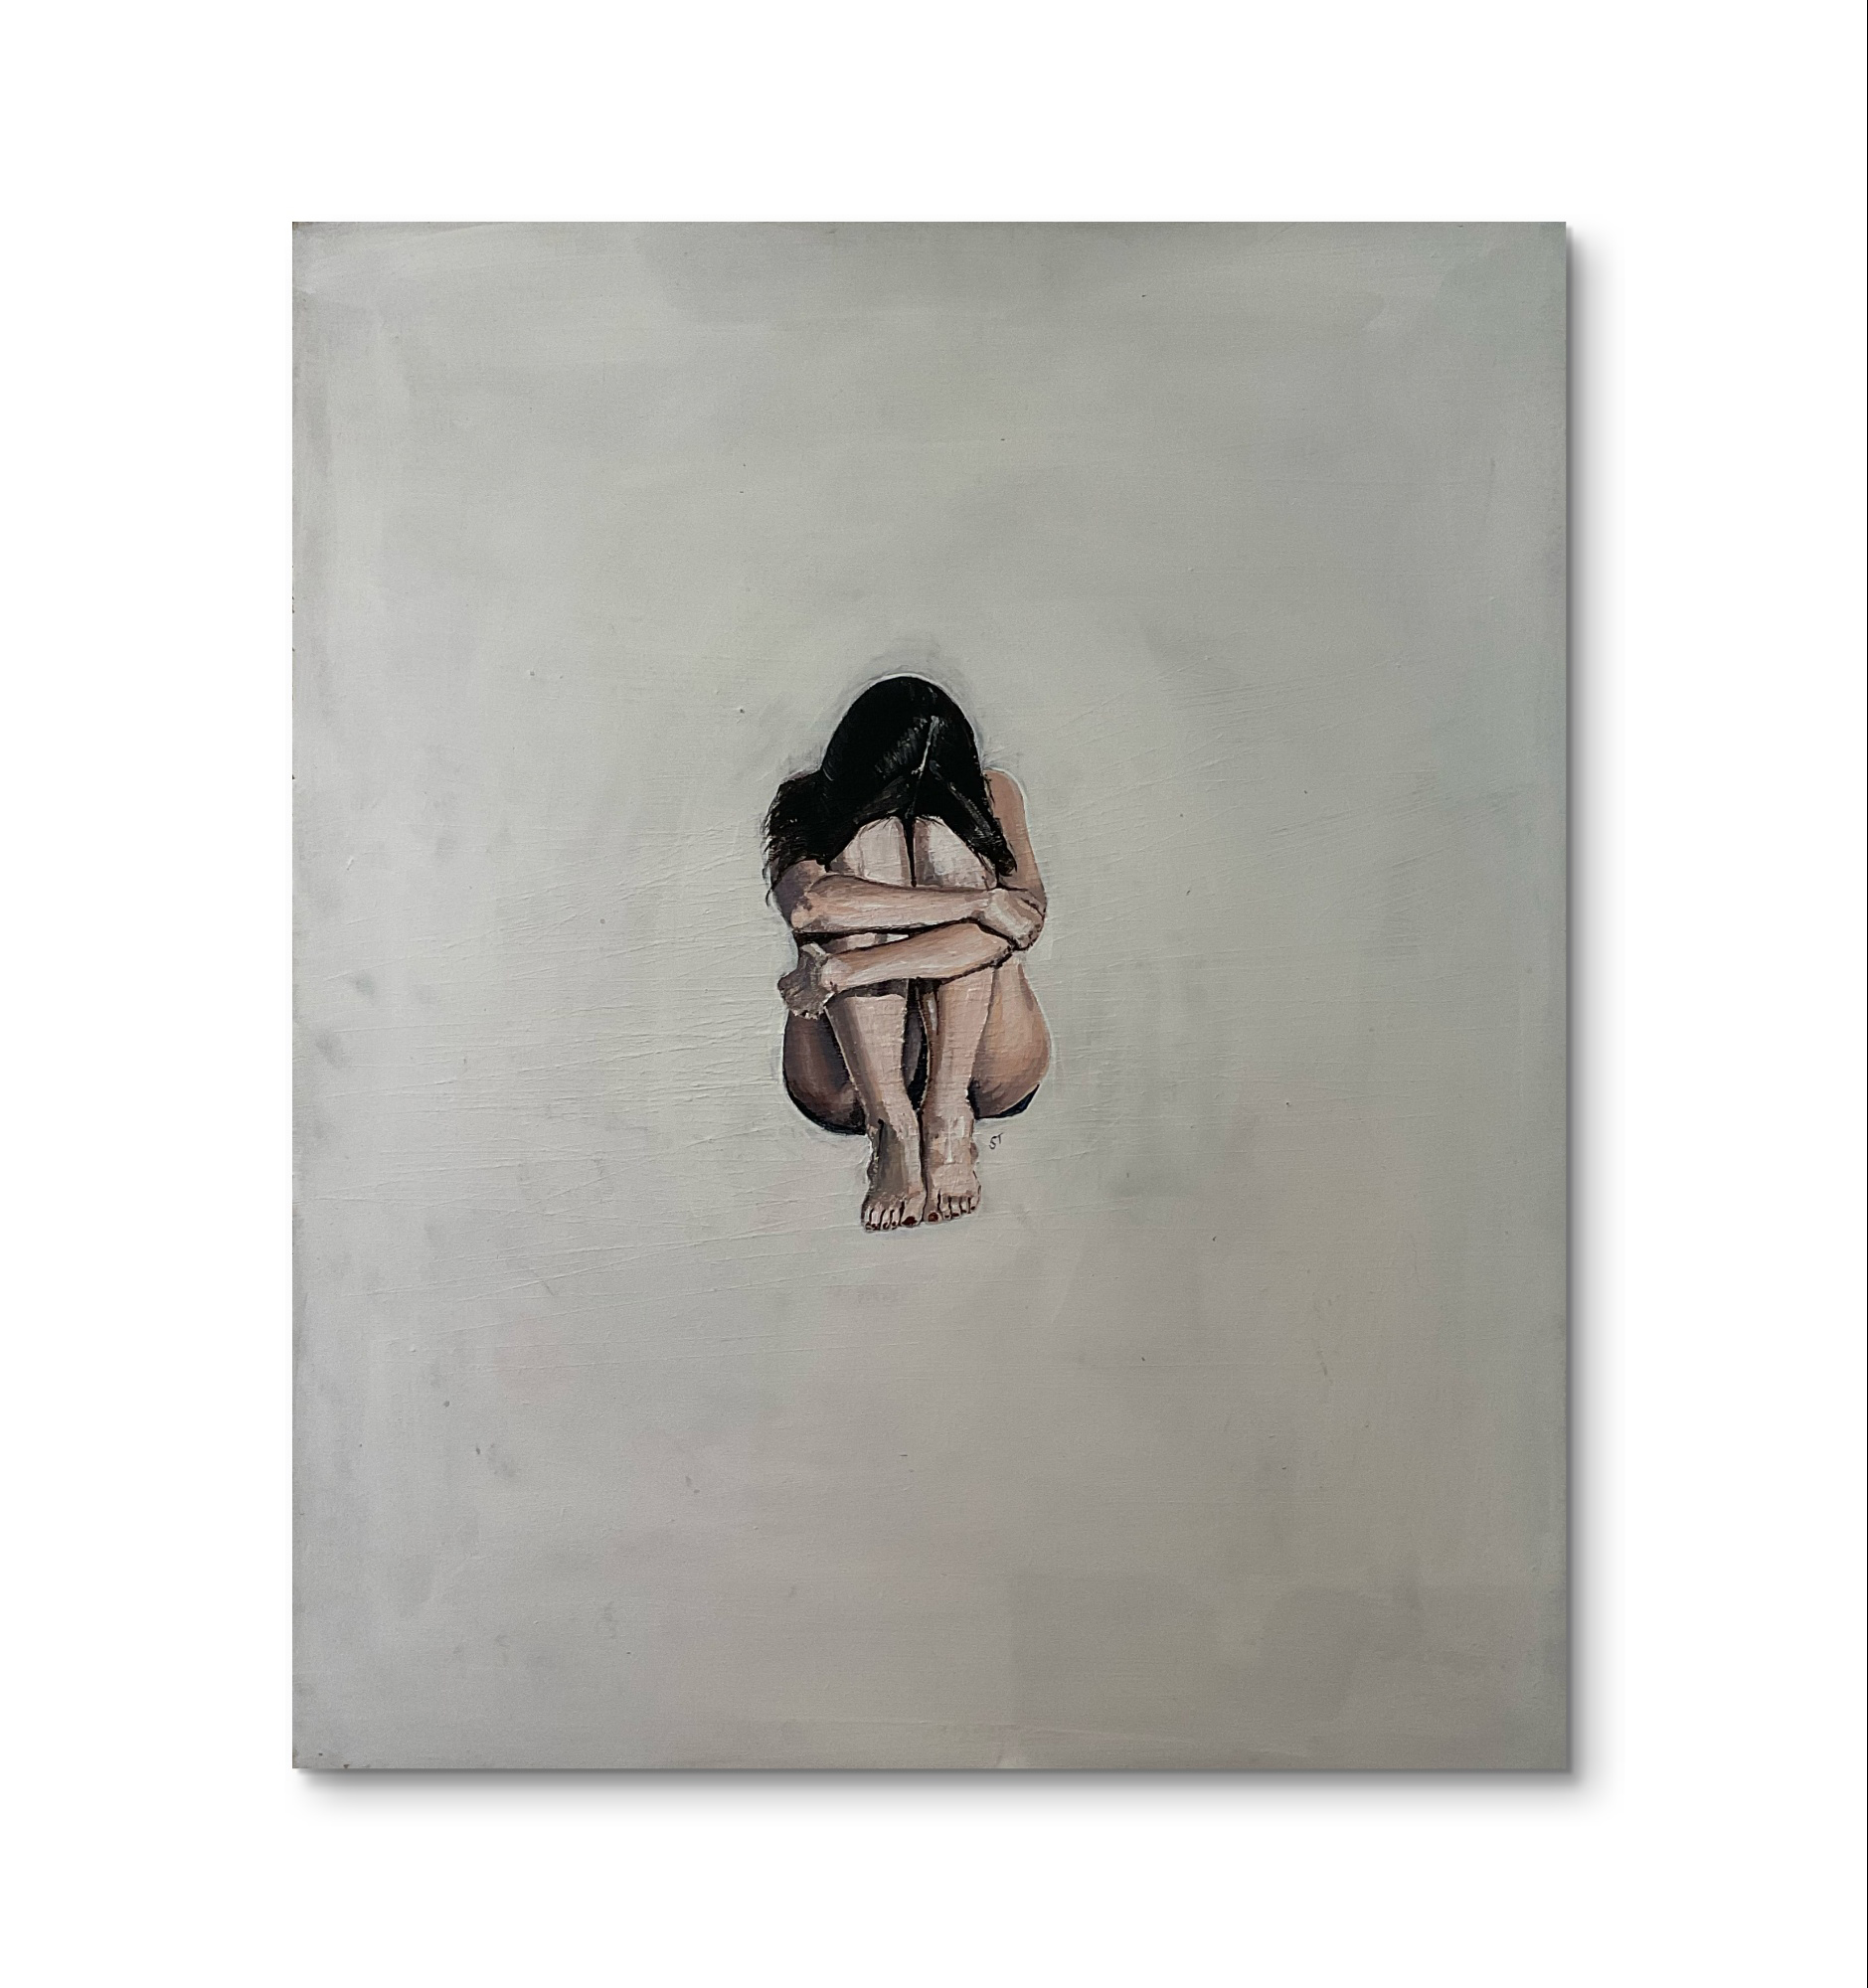 a painting of a woman sat in a foetal position representing how women can make themselves small to fit in or make others feel more comfortable.It also represents how women's voices can feel small in the world and how they sometimes struggle to take up their own space.